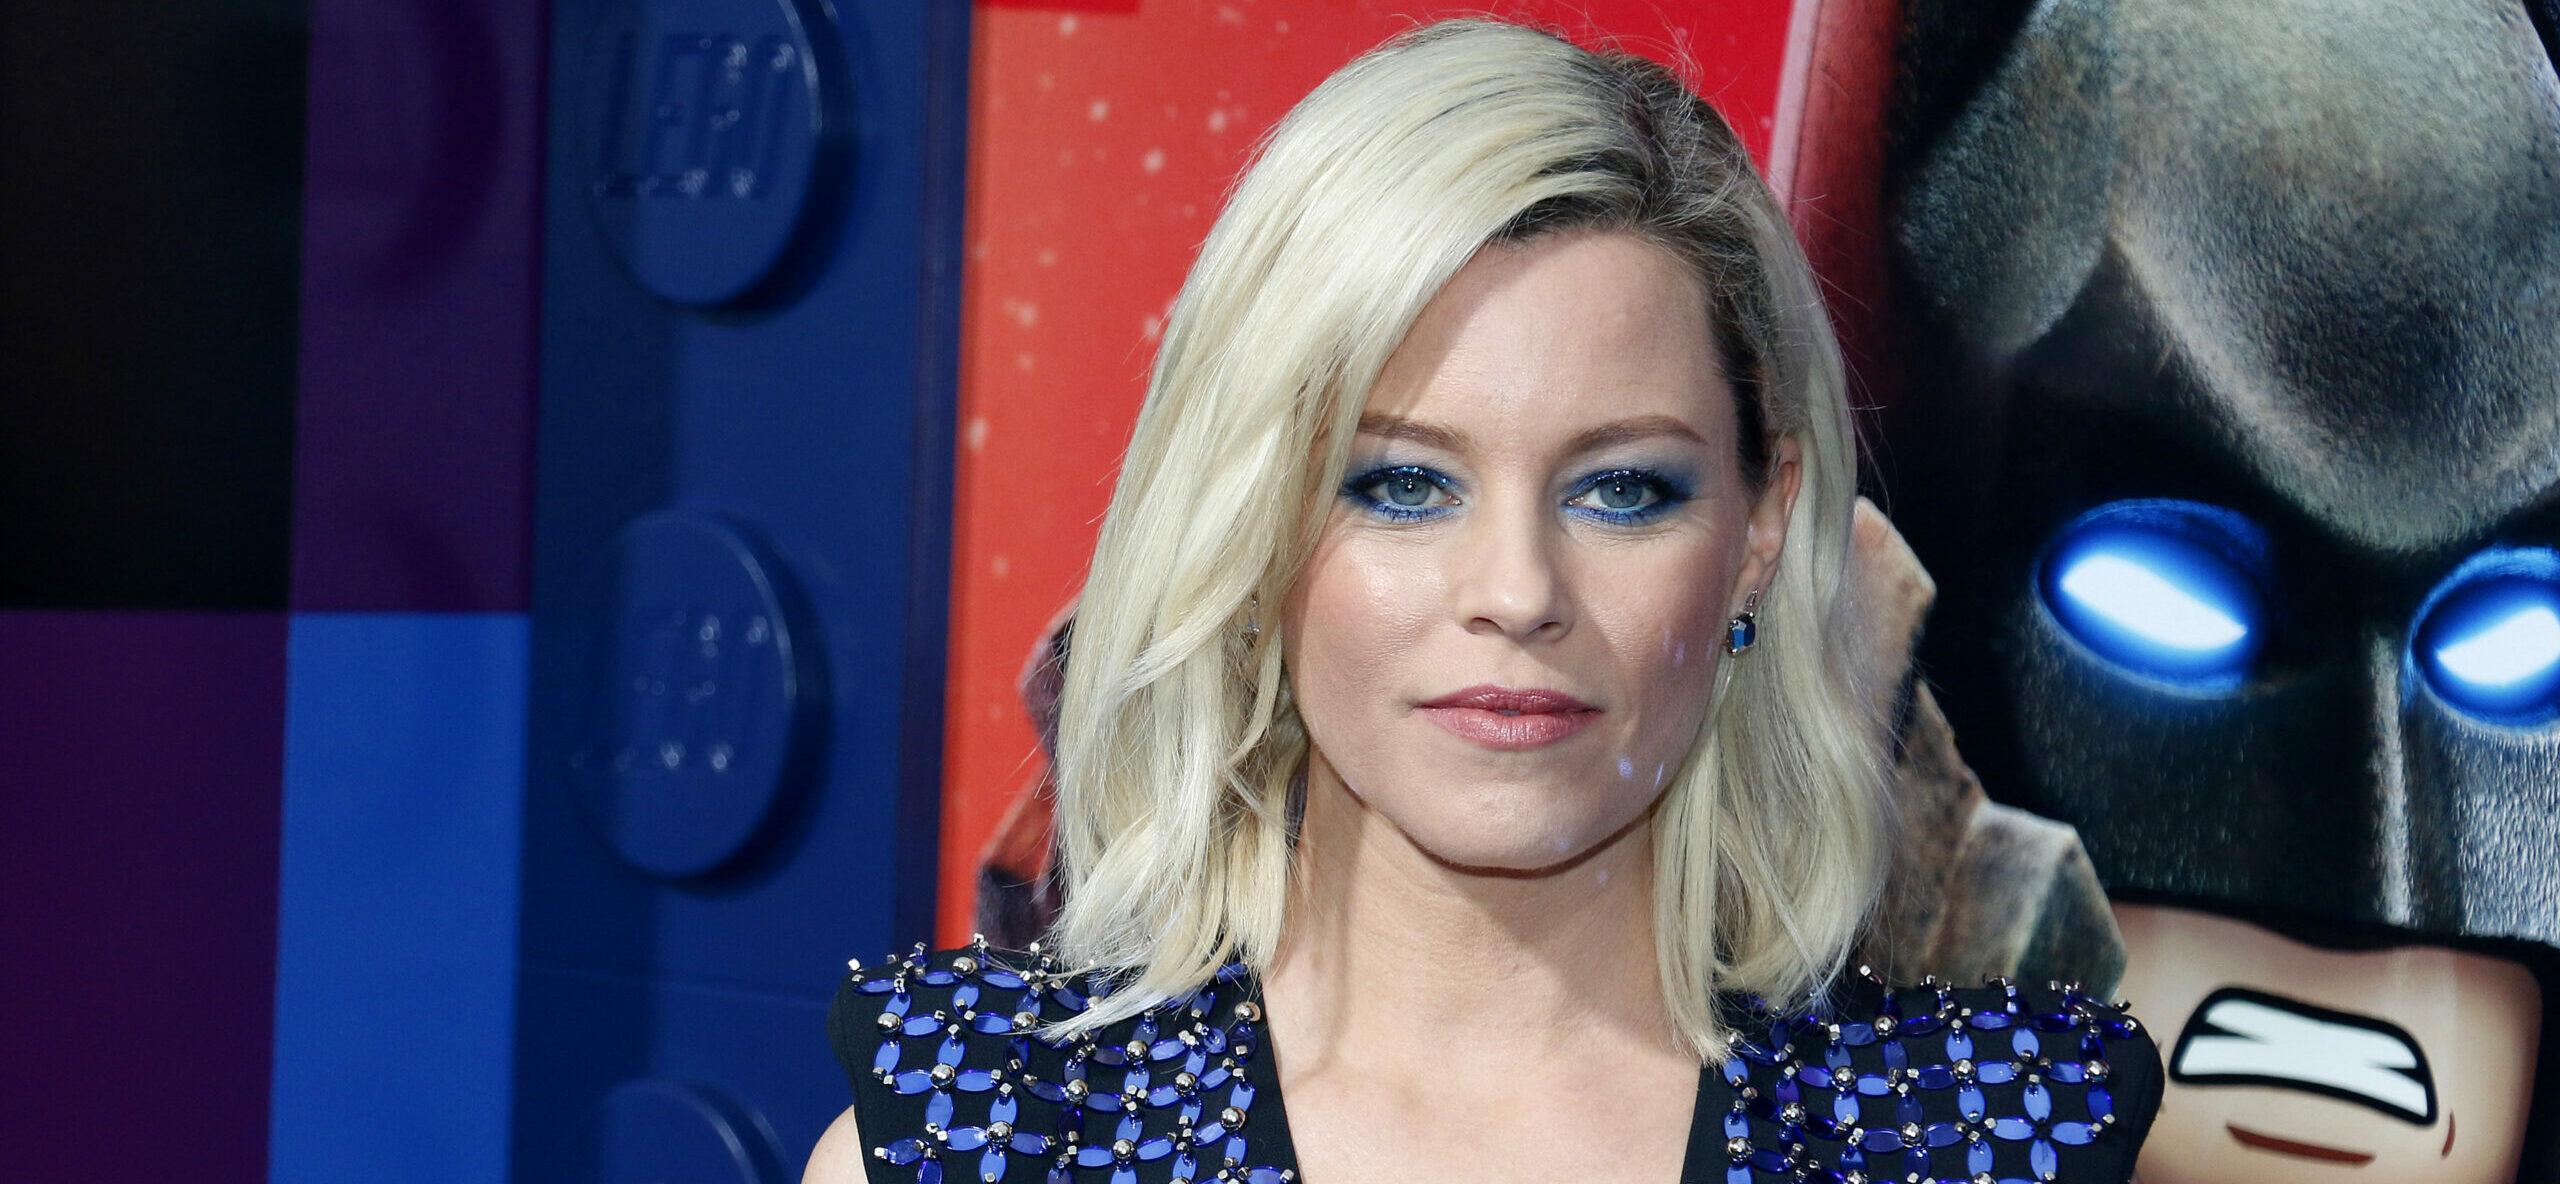 Elizabeth Banks at the Los Angeles premiere of 'The Lego Movie 2: The Second Part'